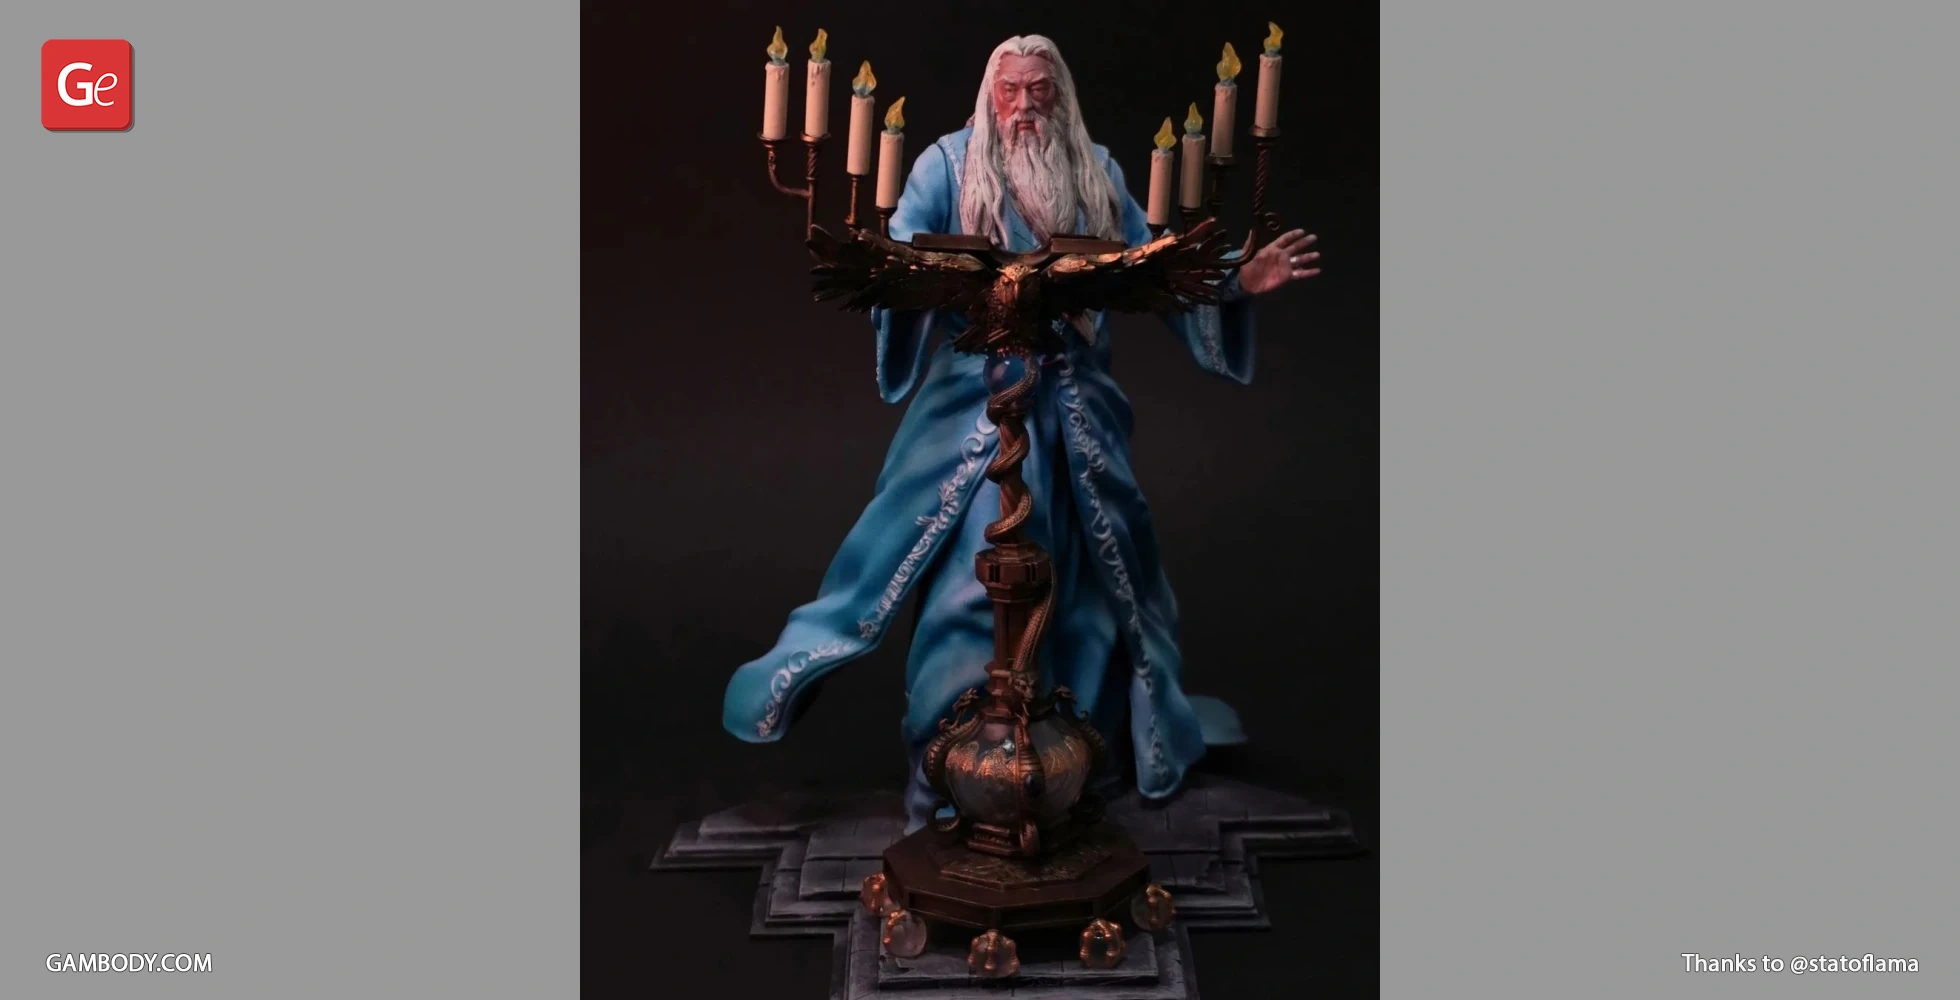 Buy Albus Dumbledore 3D Printing Figurine | Assembly